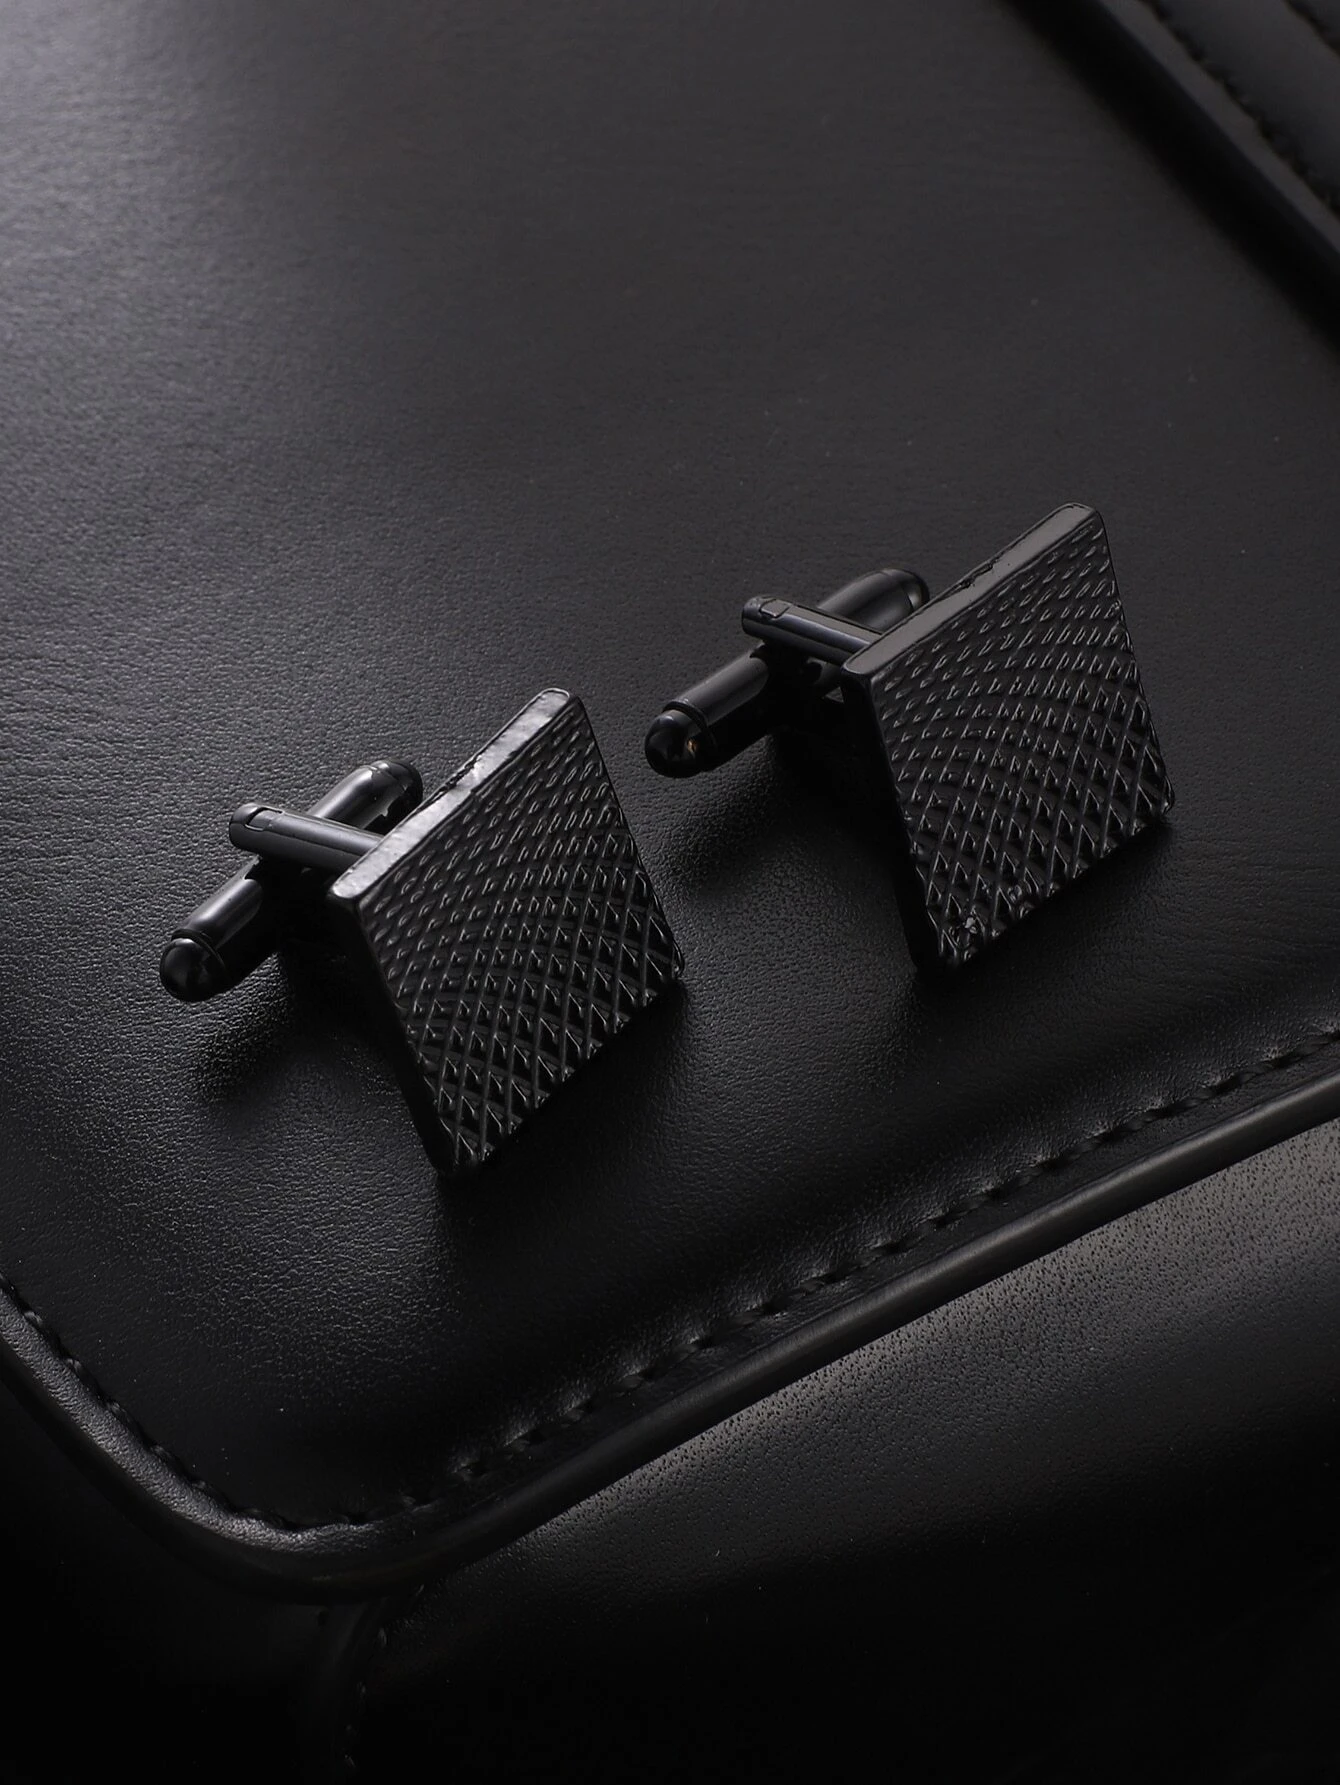 Personalized Cufflinks in Black on leather bag